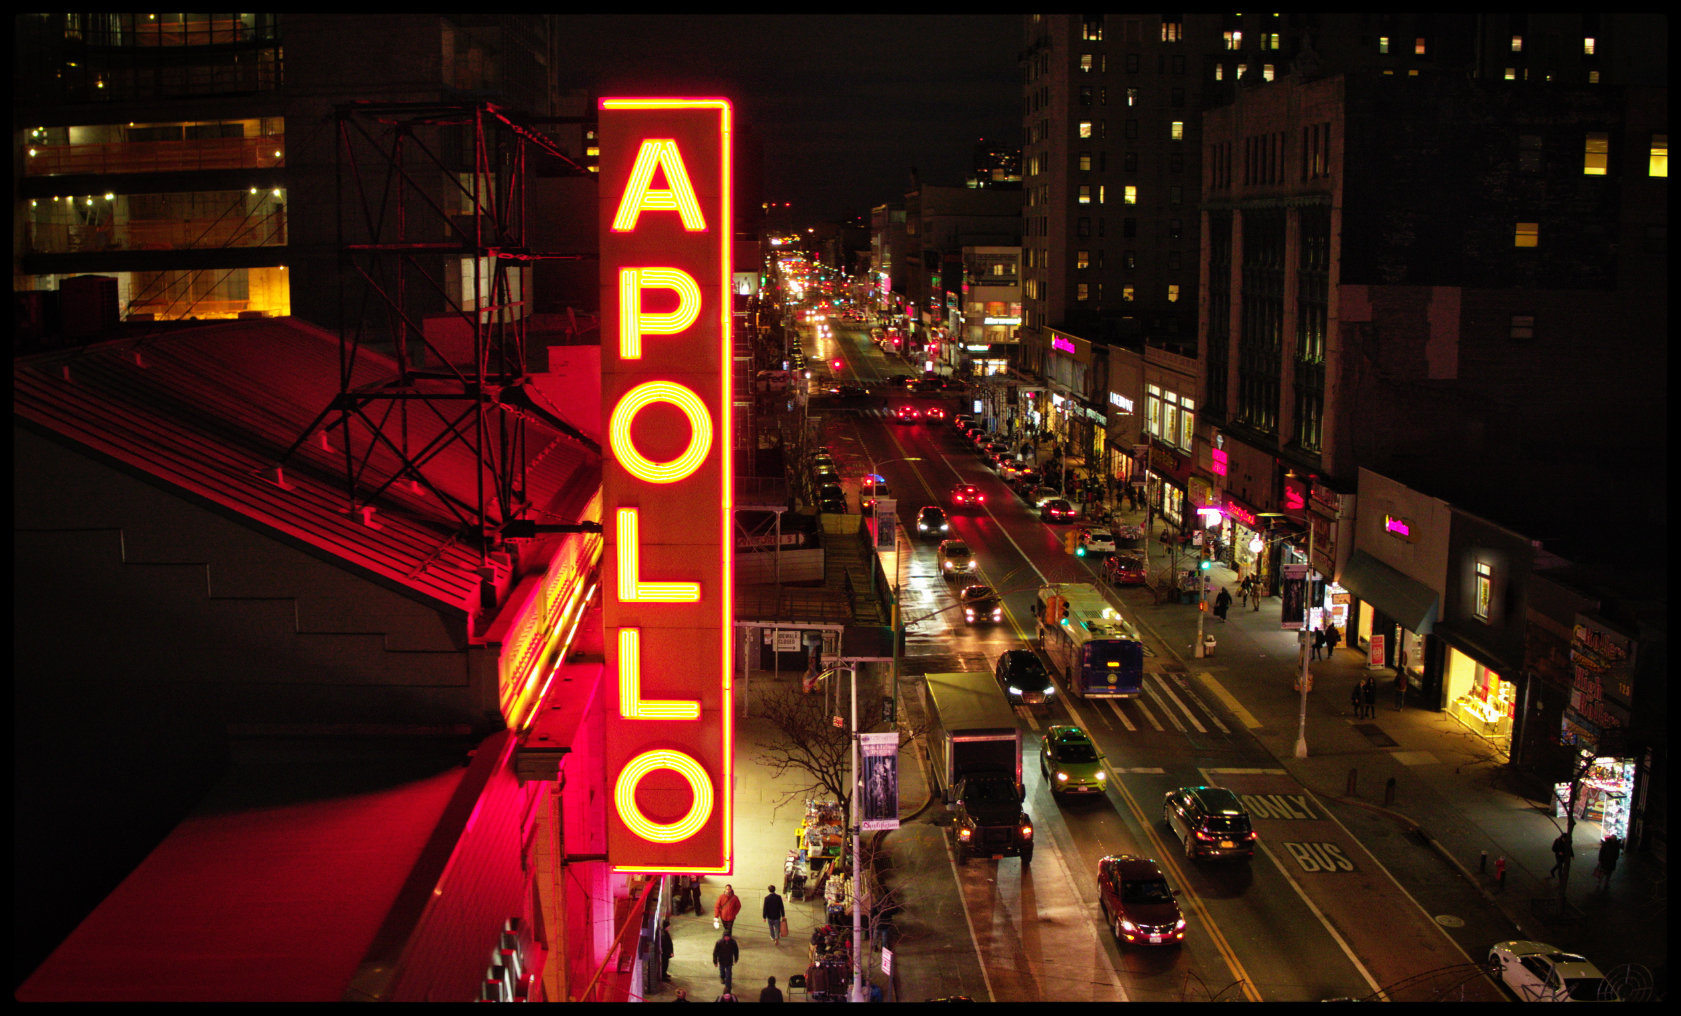 The Apollo: Harlem’s Gift to American Culture